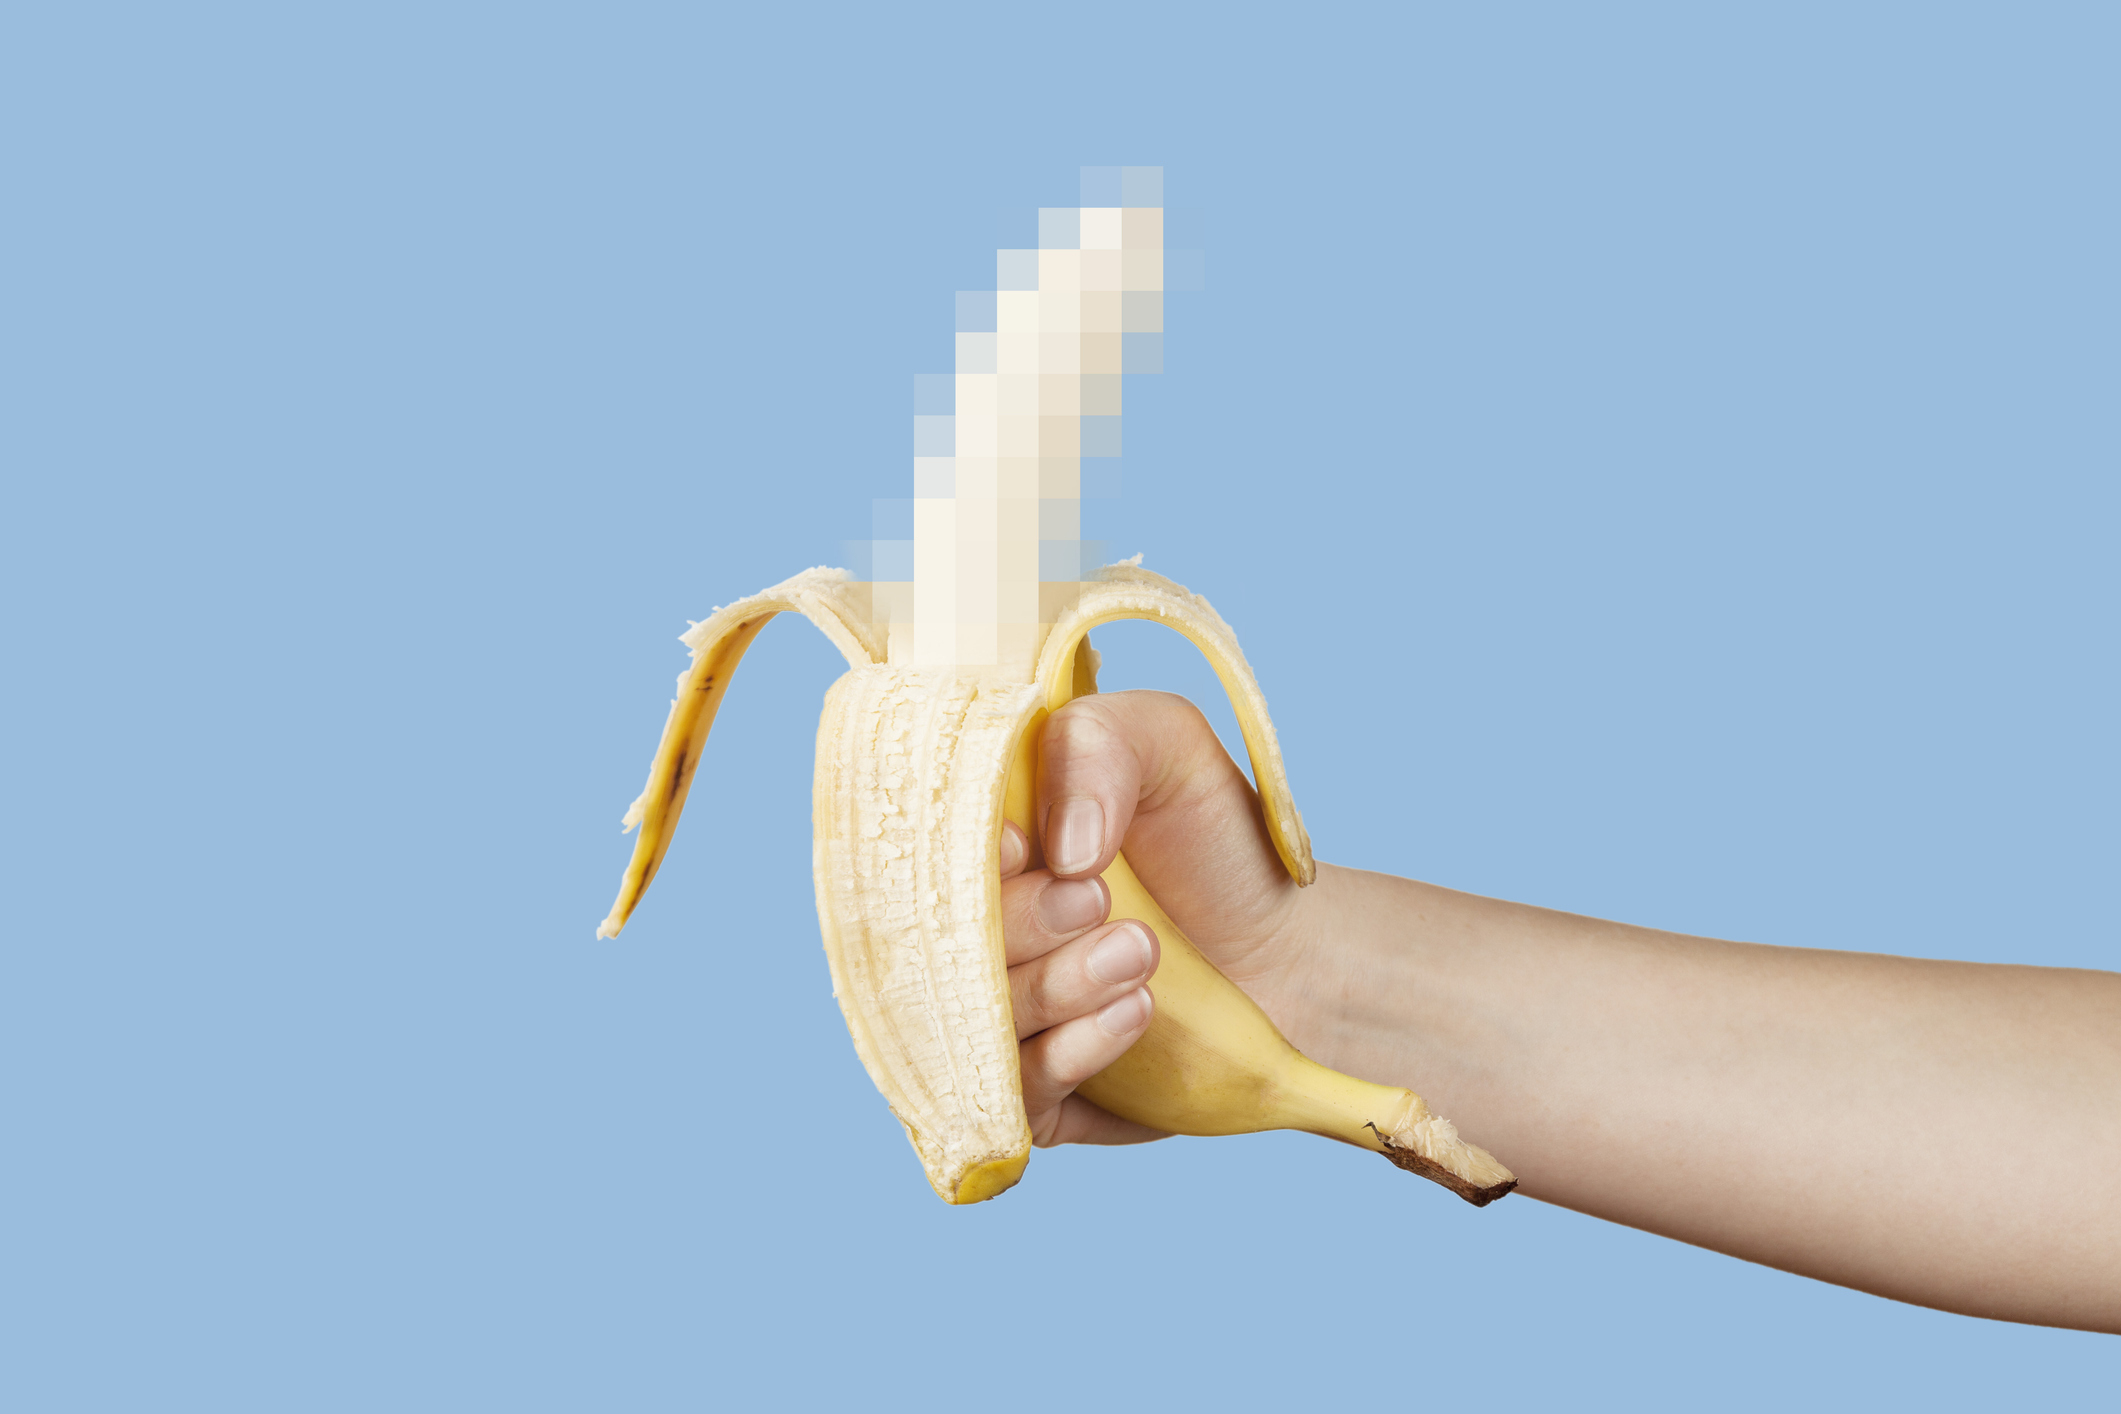 Hand holding a banana with the top portion pixelated, suggesting a censored object